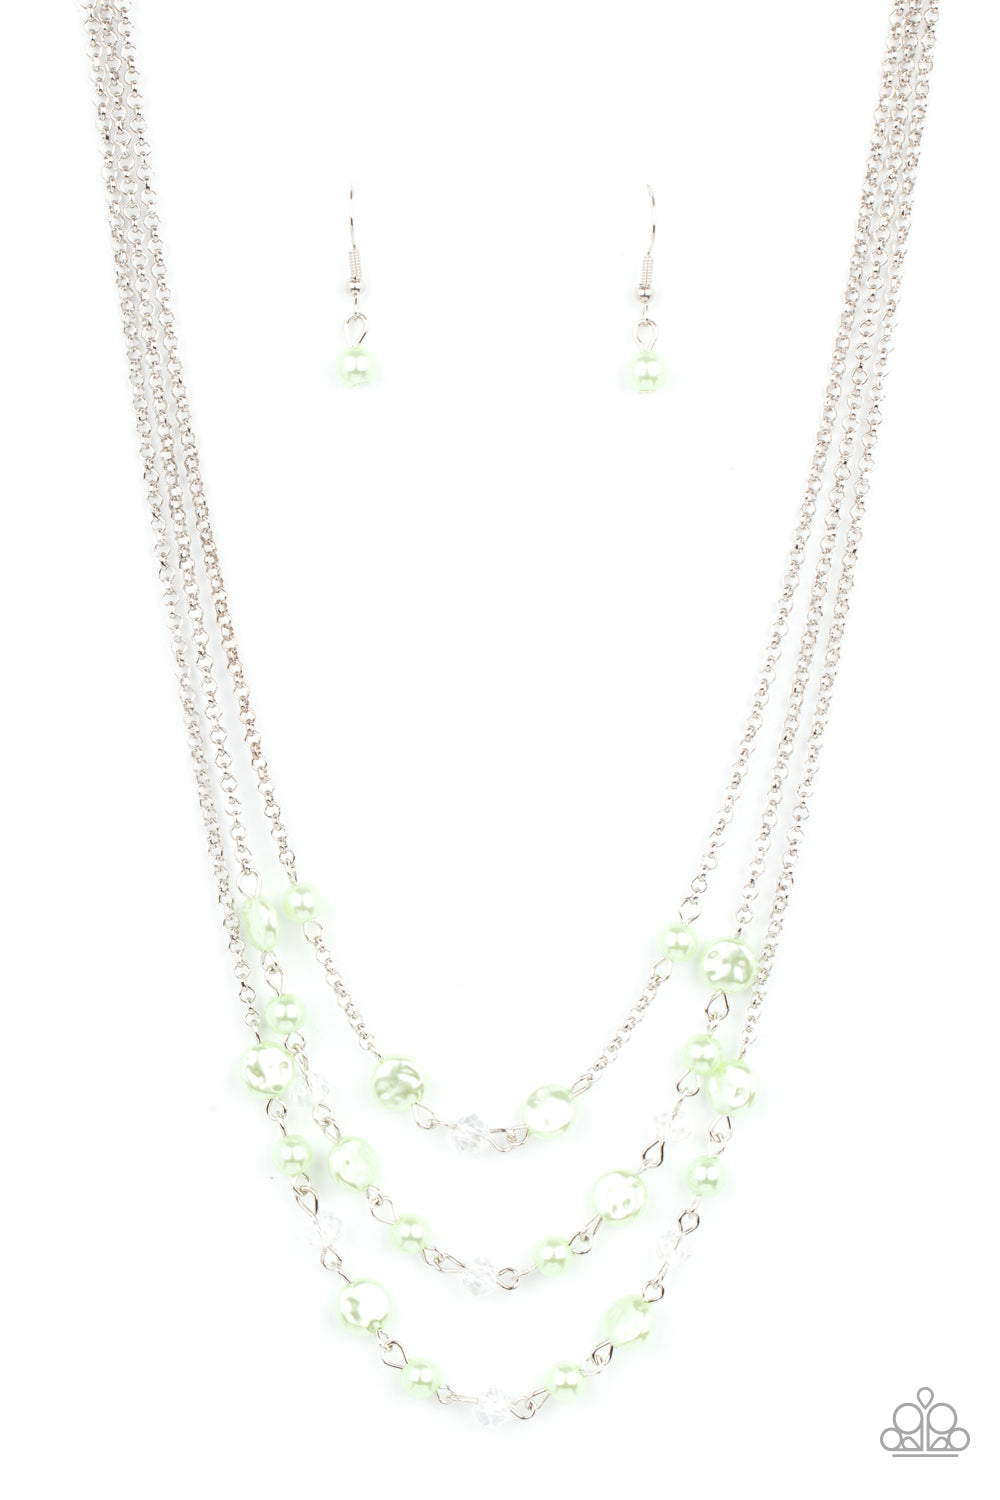 Let The Record GLOW - Green - Dainty Green Ash pearls, glassy crystal-like beads, and imperfect Green Ash pearly accents sporadically link with sections of shimmery silver chains, creating timeless layers below the collar. Features an adjustable clasp closure.